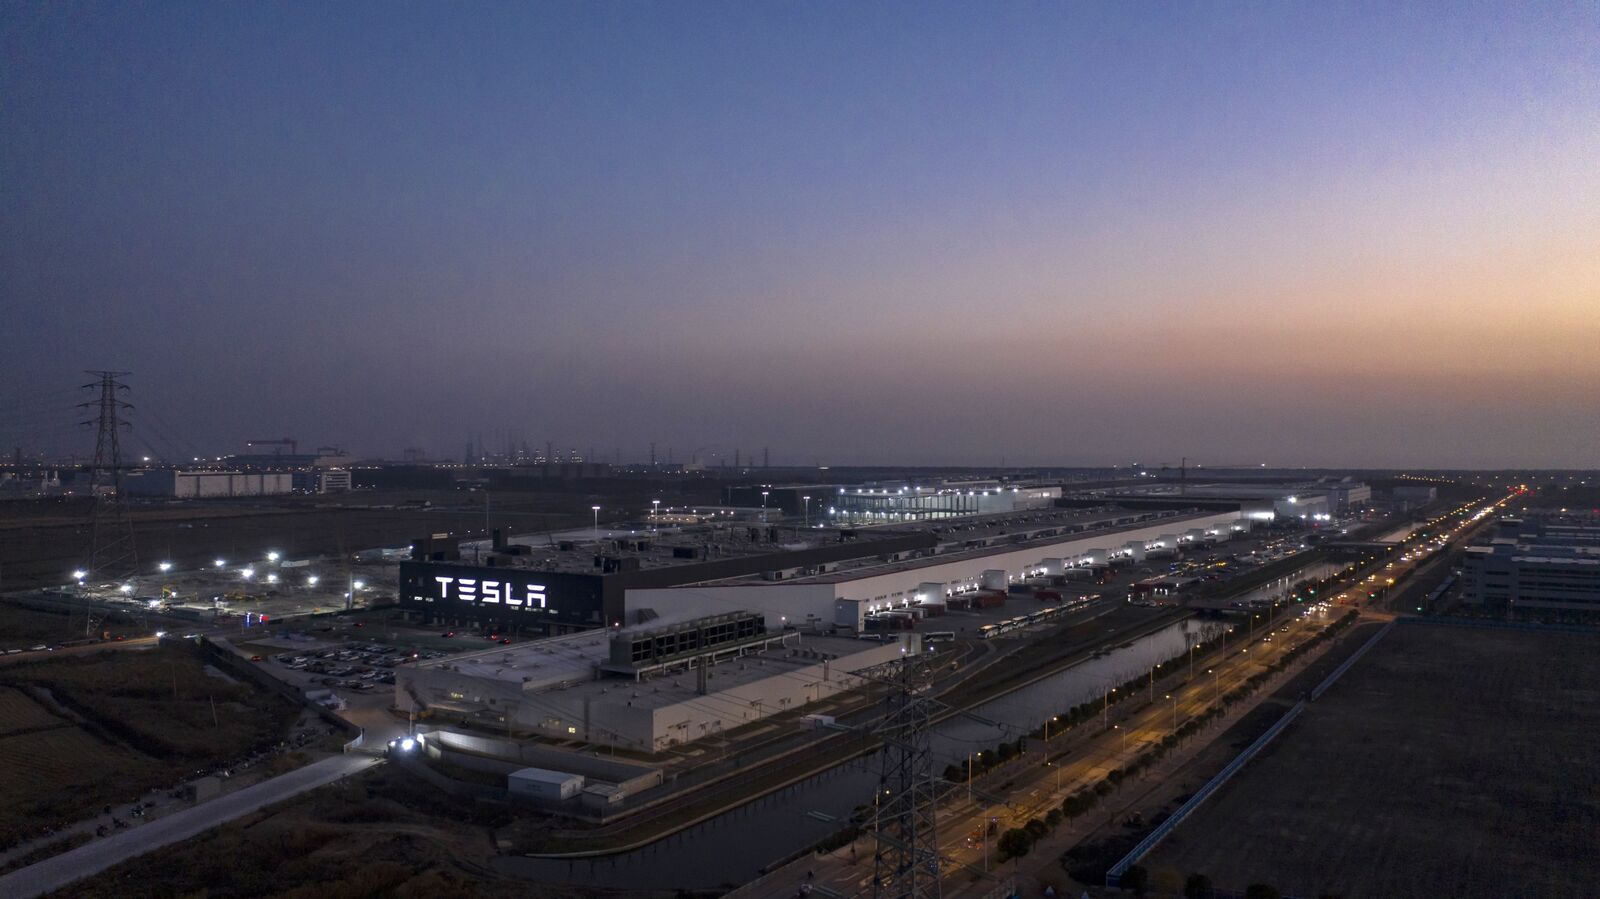 Tesla Gigafactory In Shanghai As Carmaker's Dominant Position in China Could Be Threatened Next Year